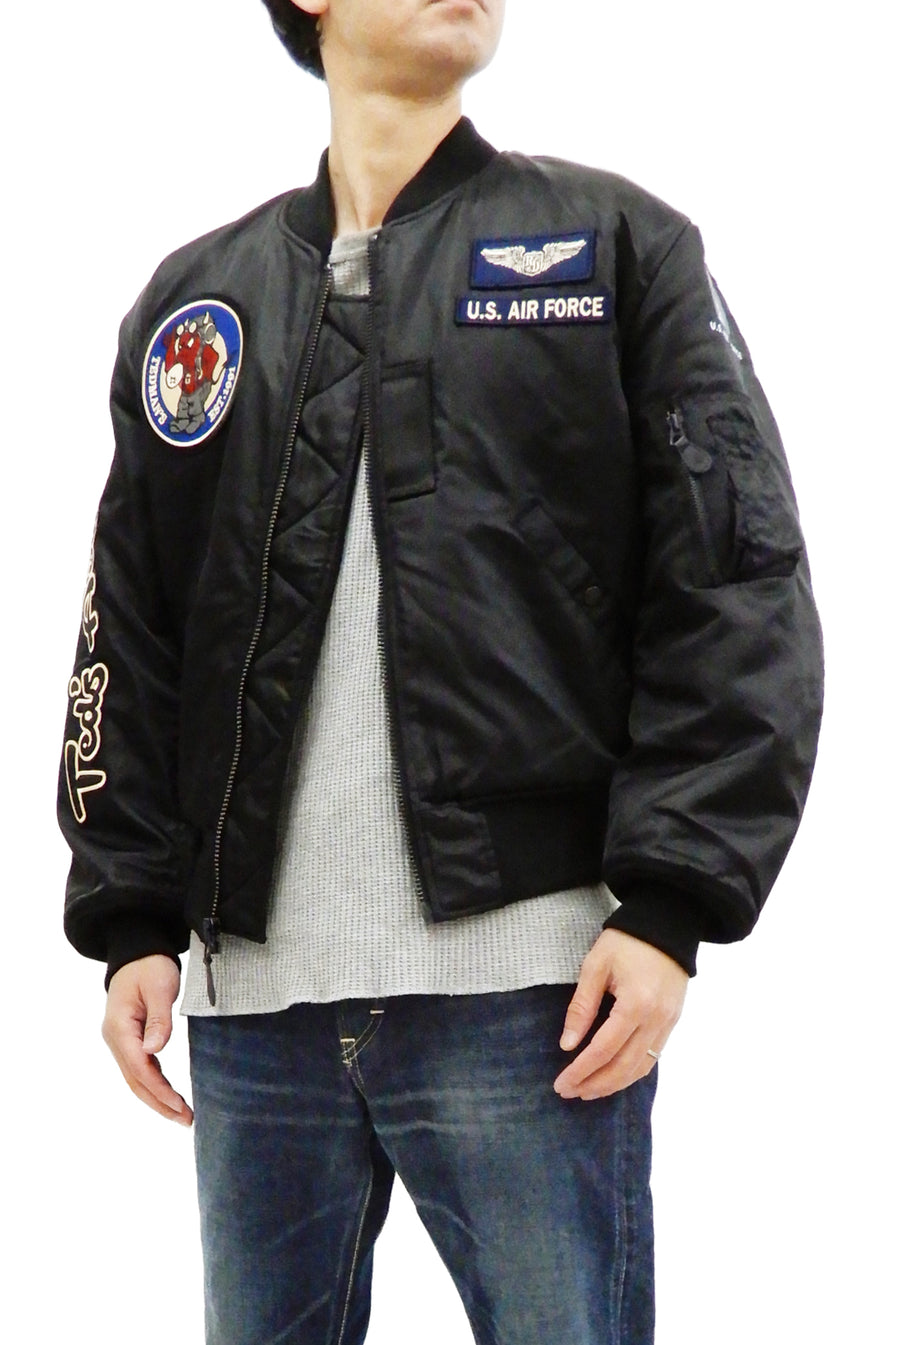 MFH MA1 bomber pilot jacket, black | Apparel \ Jackets \ Flight Jackets  militarysurplus.eu | Army Navy Surplus - Tactical | Big variety - Cheap  prices | Military Surplus, Clothing, Law Enforcement, Boots, Outdoor &  Tactical Gear